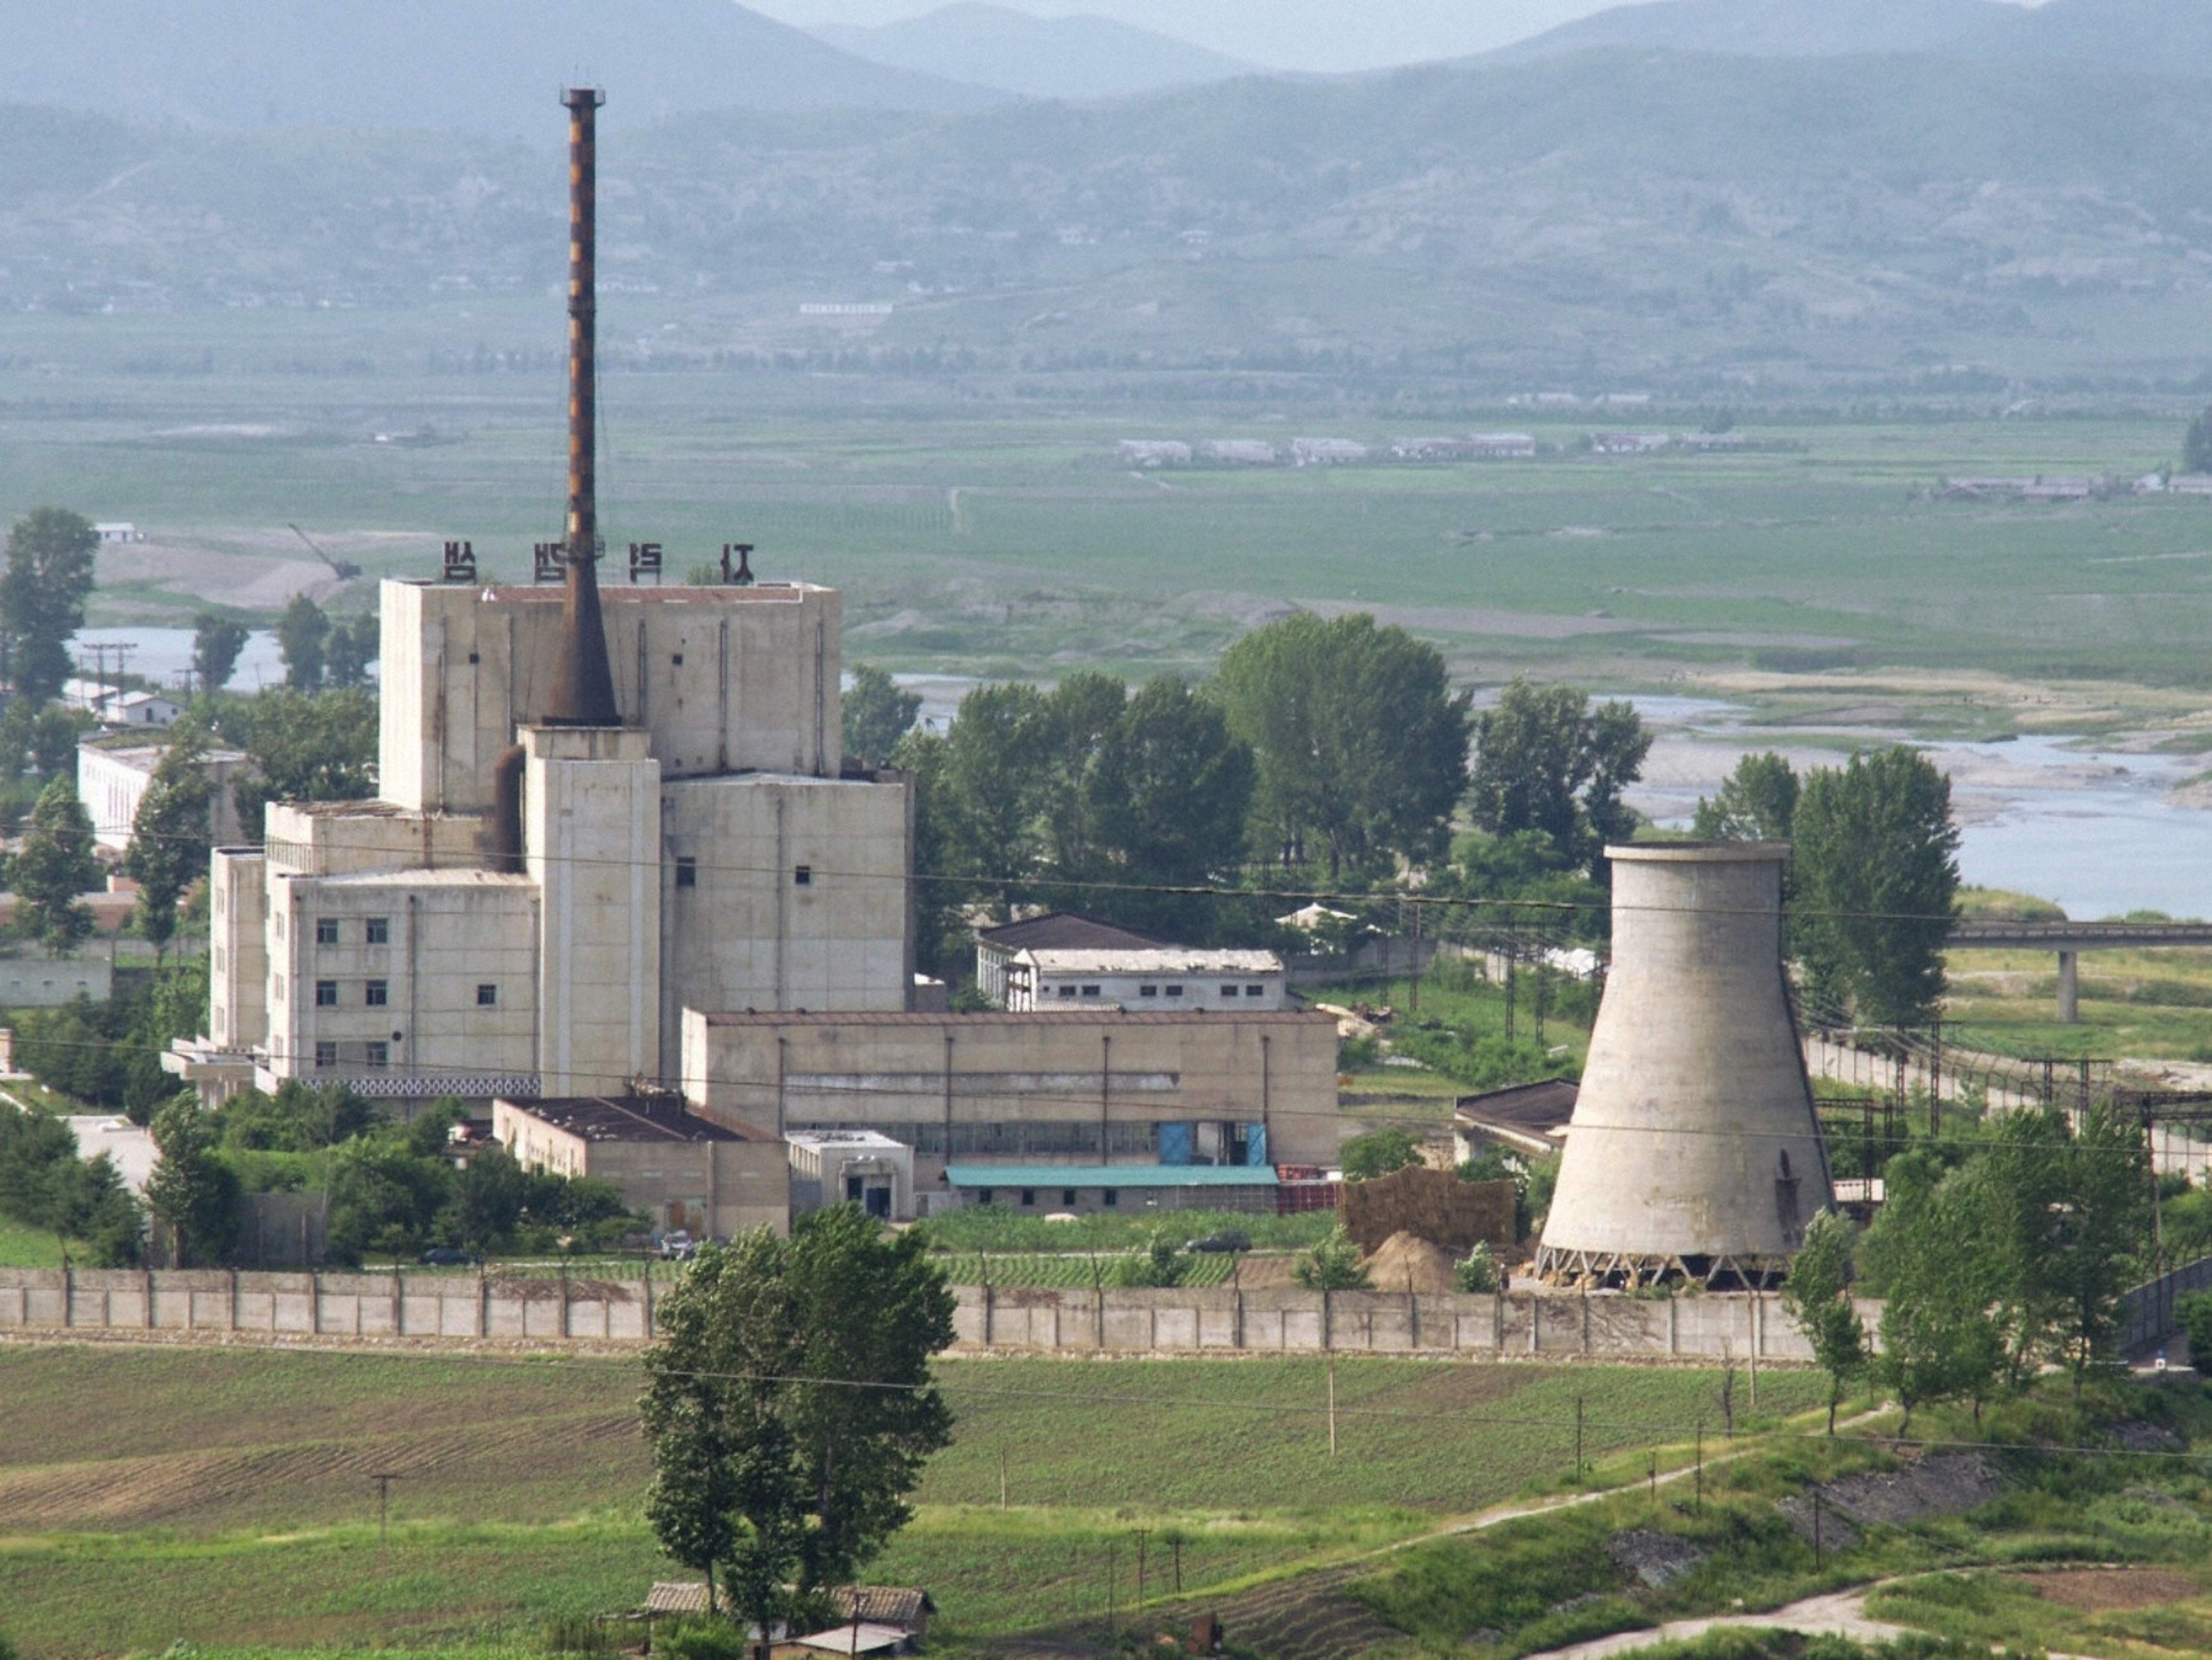 A North Korean nuclear plant in Yongbyon. Photo: Reuters